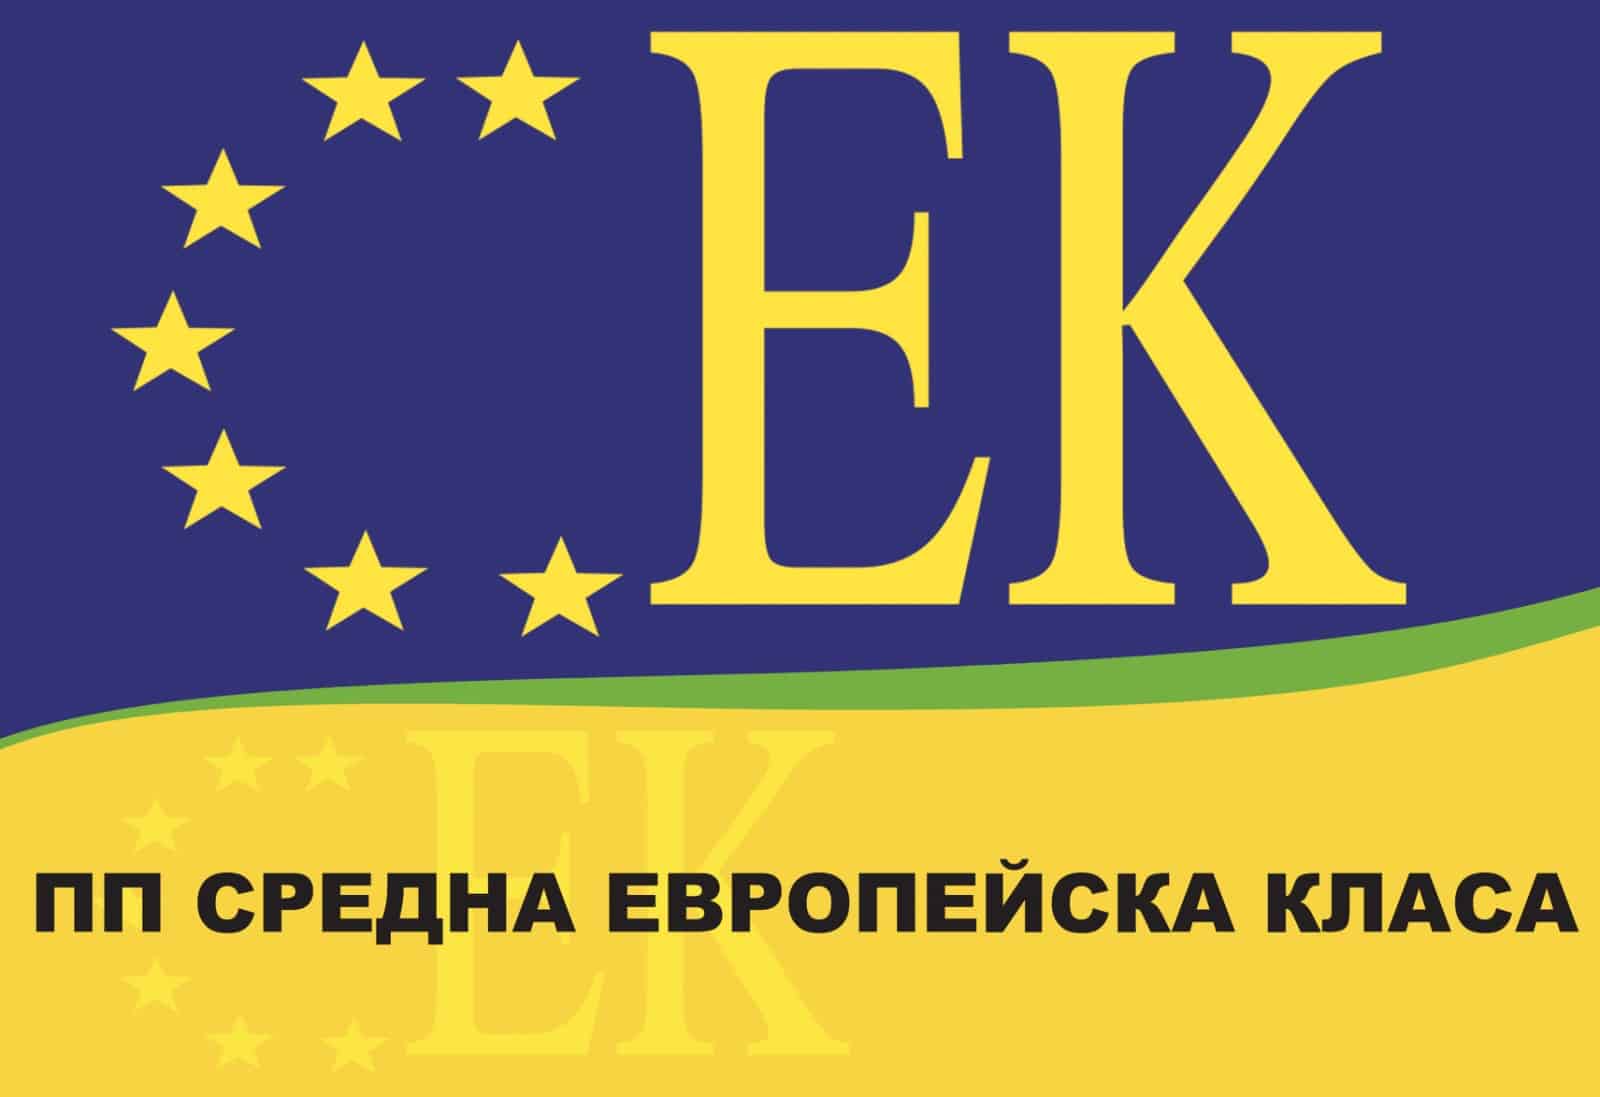 Middle European Class political party opposed the proposal of the